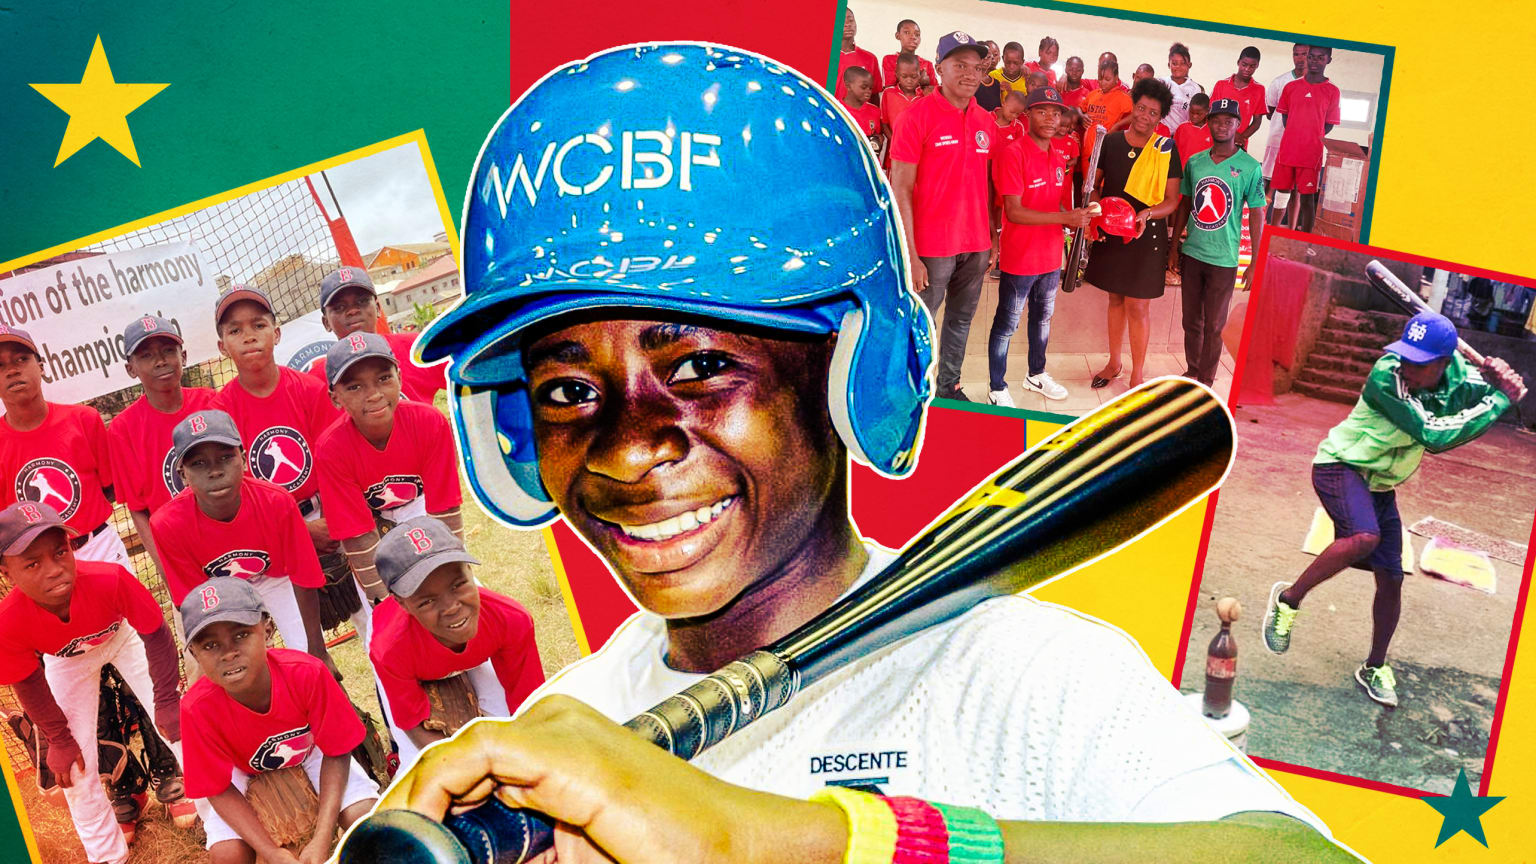 A photo illustration showing a young player in a helmet holding a bat, with other pictures scattered around him